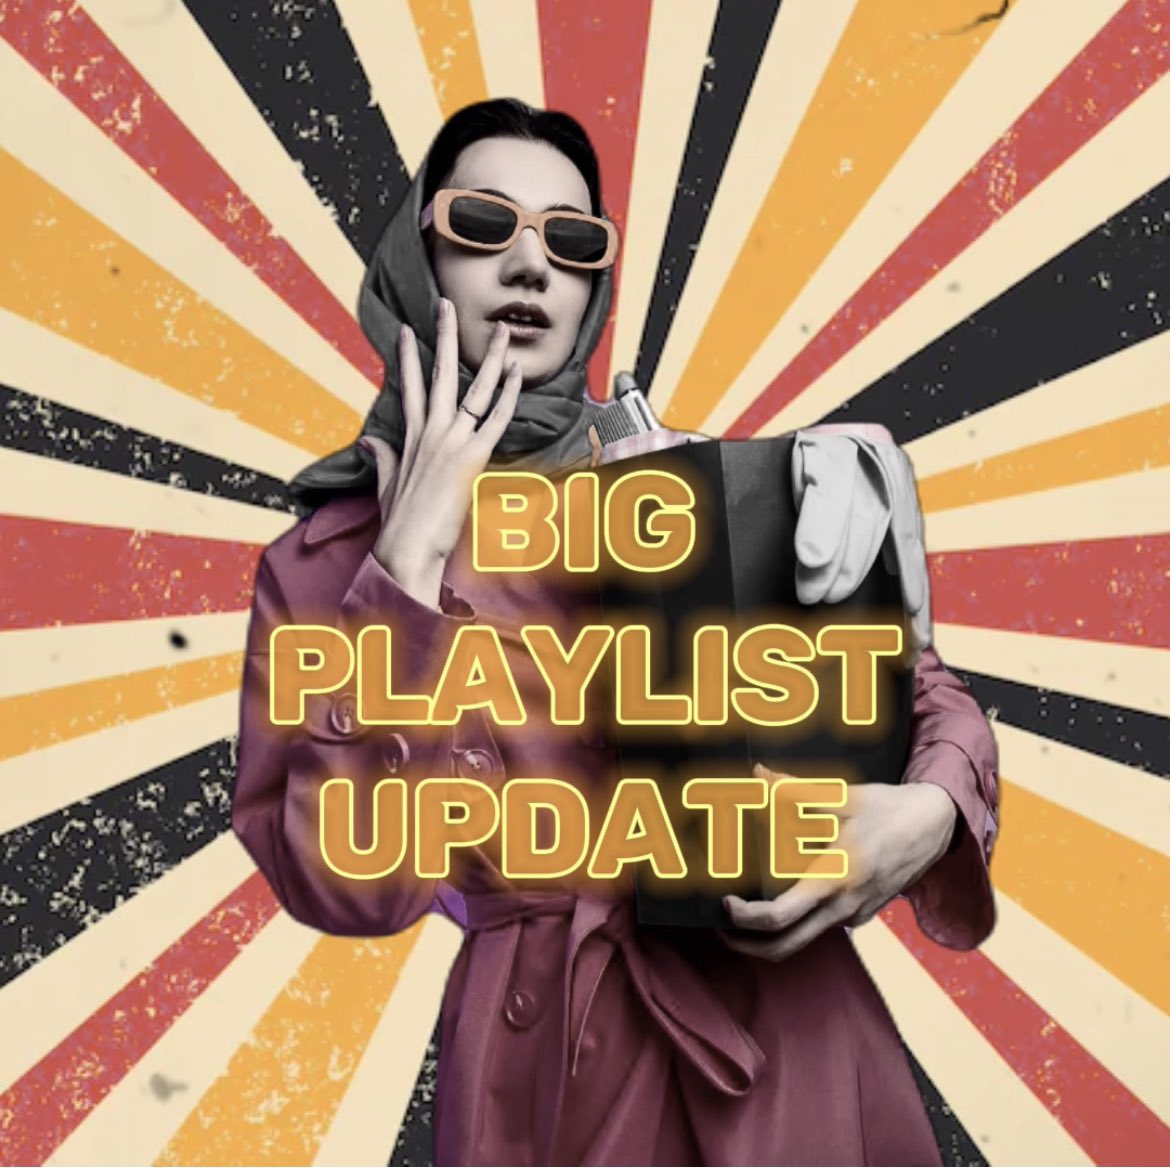 Okay guys, let's cheer up this Sunday! 

KERRY Announces a Big Playlist Update!!! 

open.spotify.com/user/314i7h4p6…

🪩Choose one of my Spotify playlists! 
🪩Drop your fire tracks to be added!

#playlist #freeplaylist #playlistcurator